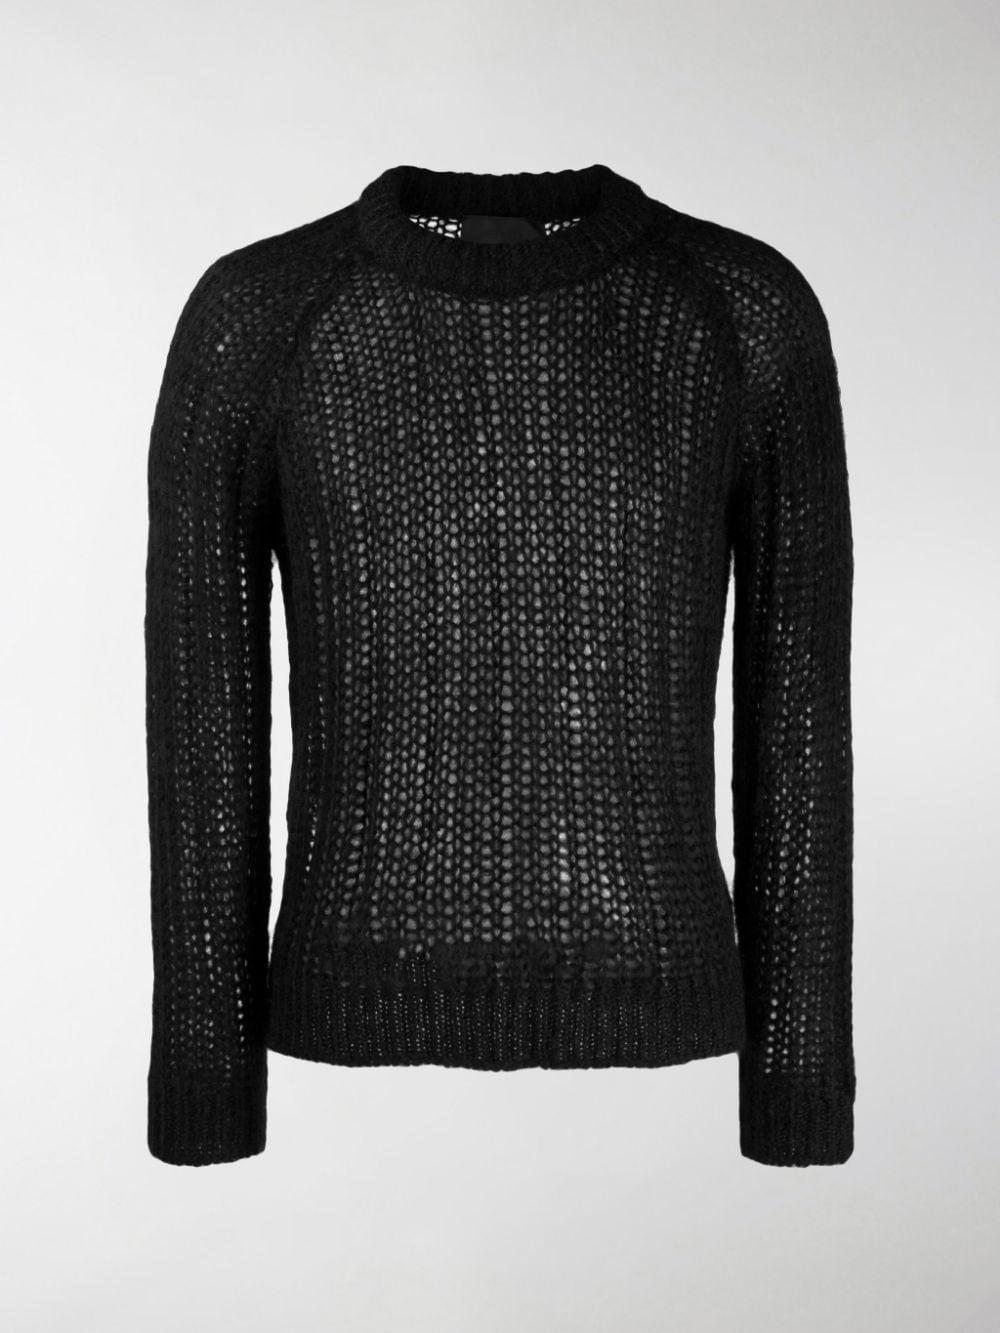 Prada Wool Chunky Knit Sweater in Black for Men - Save 24% - Lyst